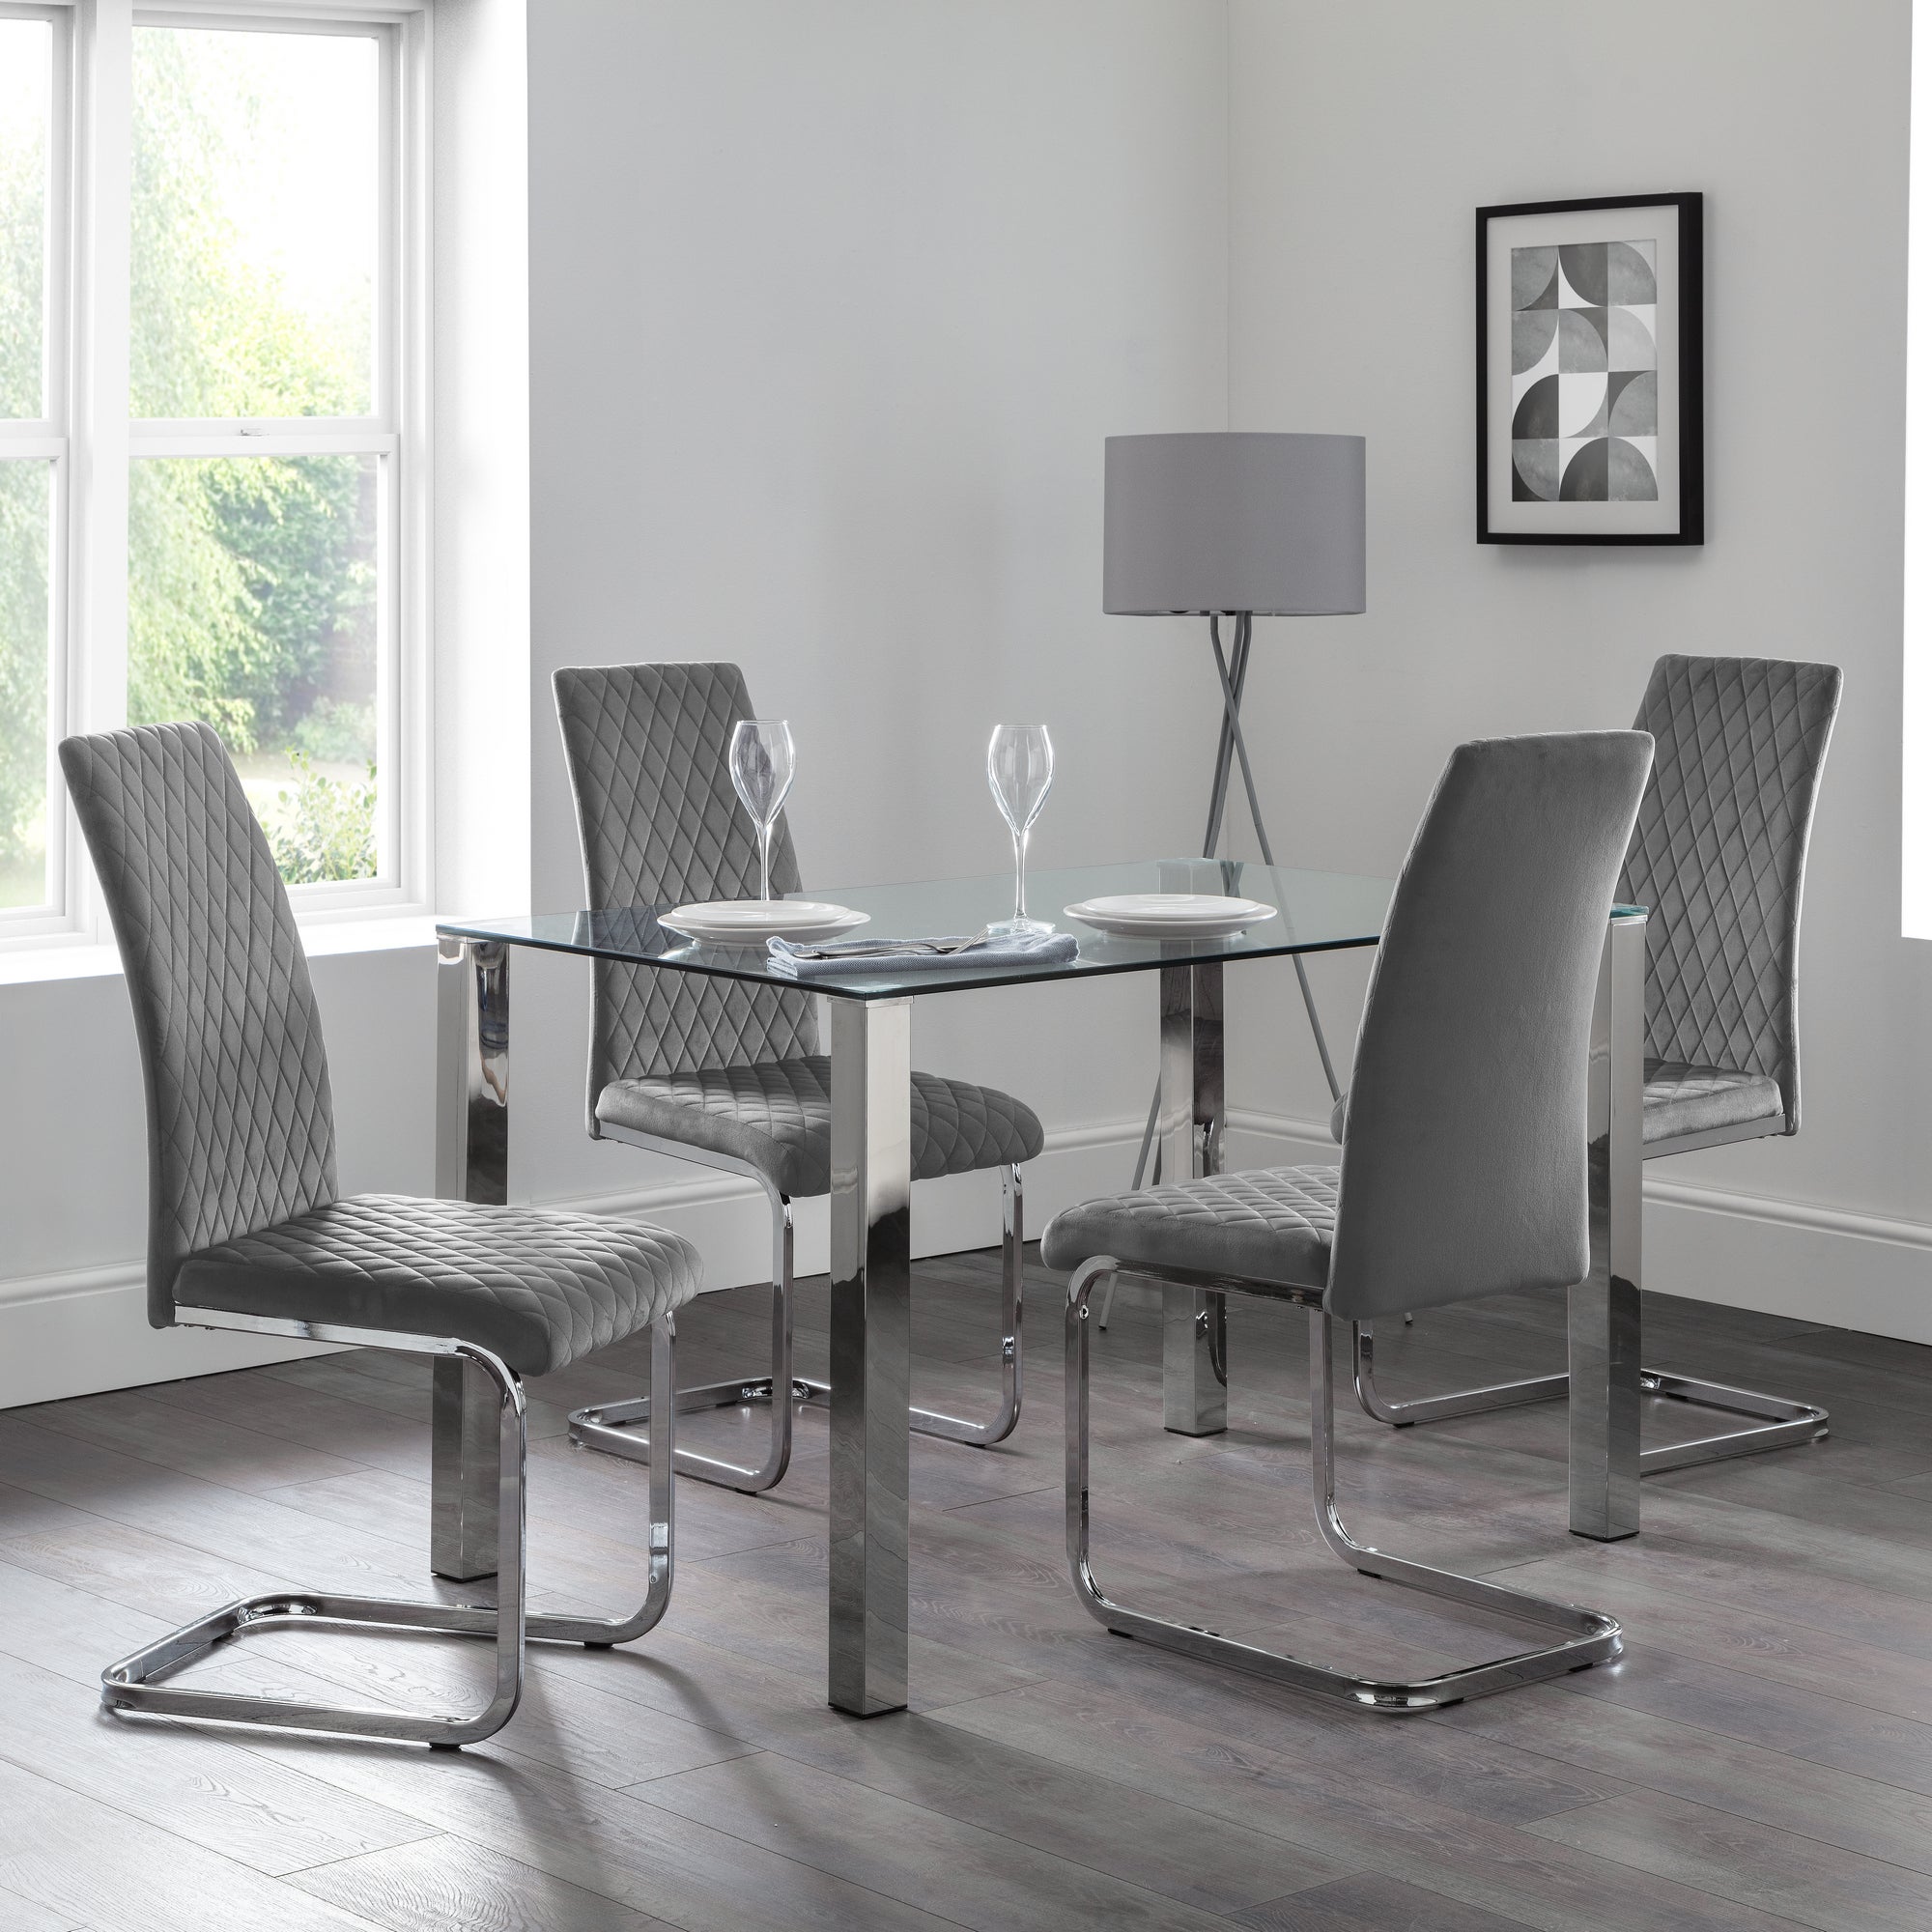 Calabria Set Of 4 Dining Chairs Velvet Grey